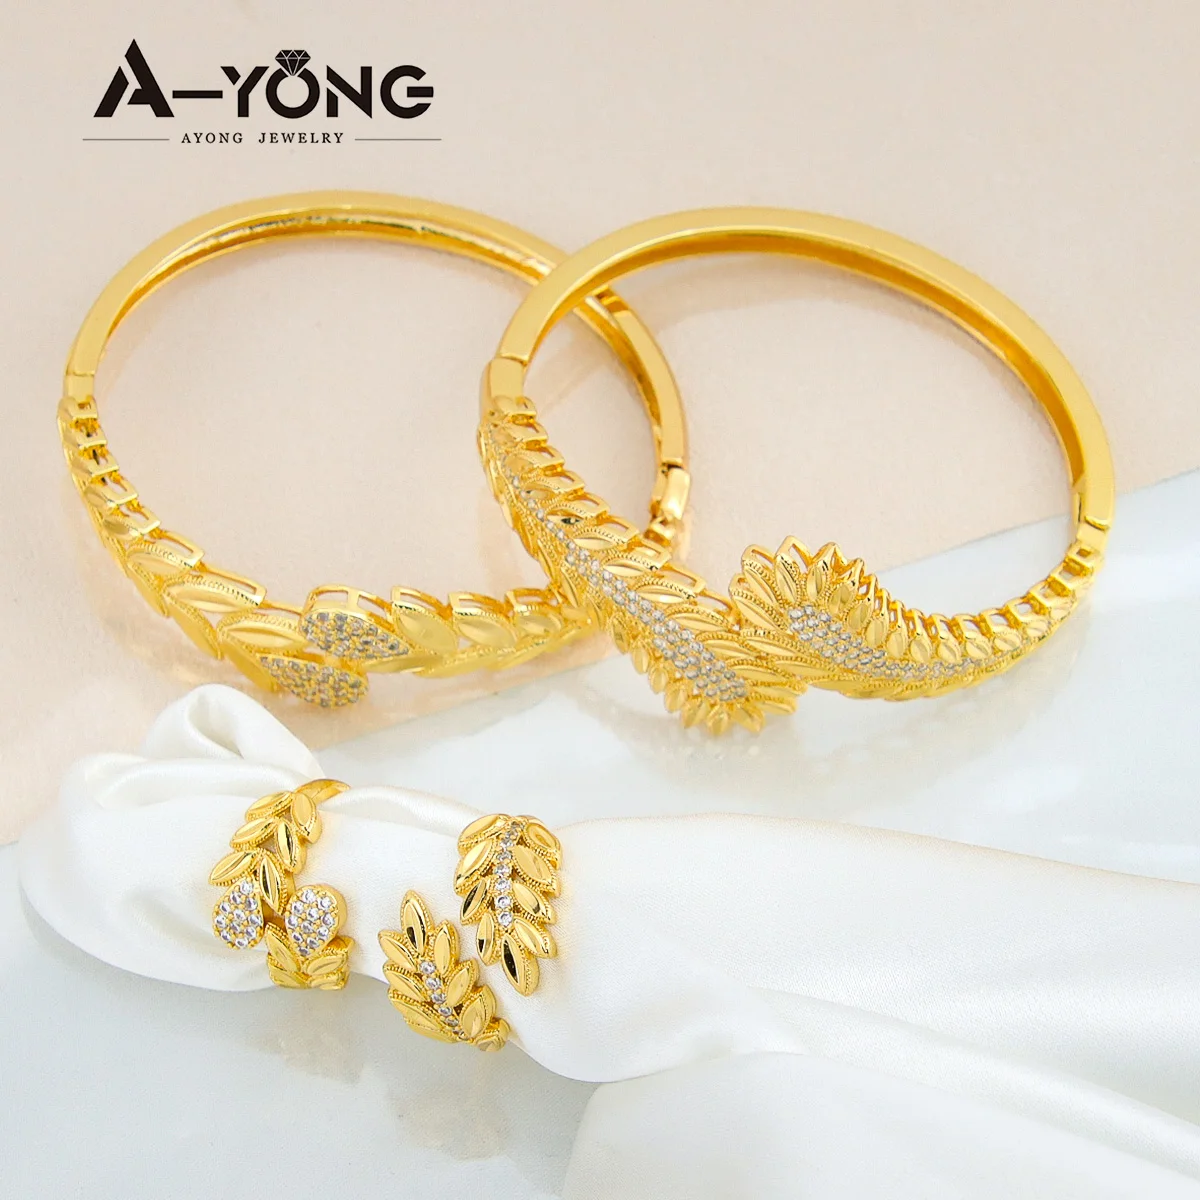 

AYONG Middle East Gold Bracelet Ring Set 21k Gold Plated Dubai Luxury Cuff Bangle Set Women Vintage Wedding Birthday Party Gifts